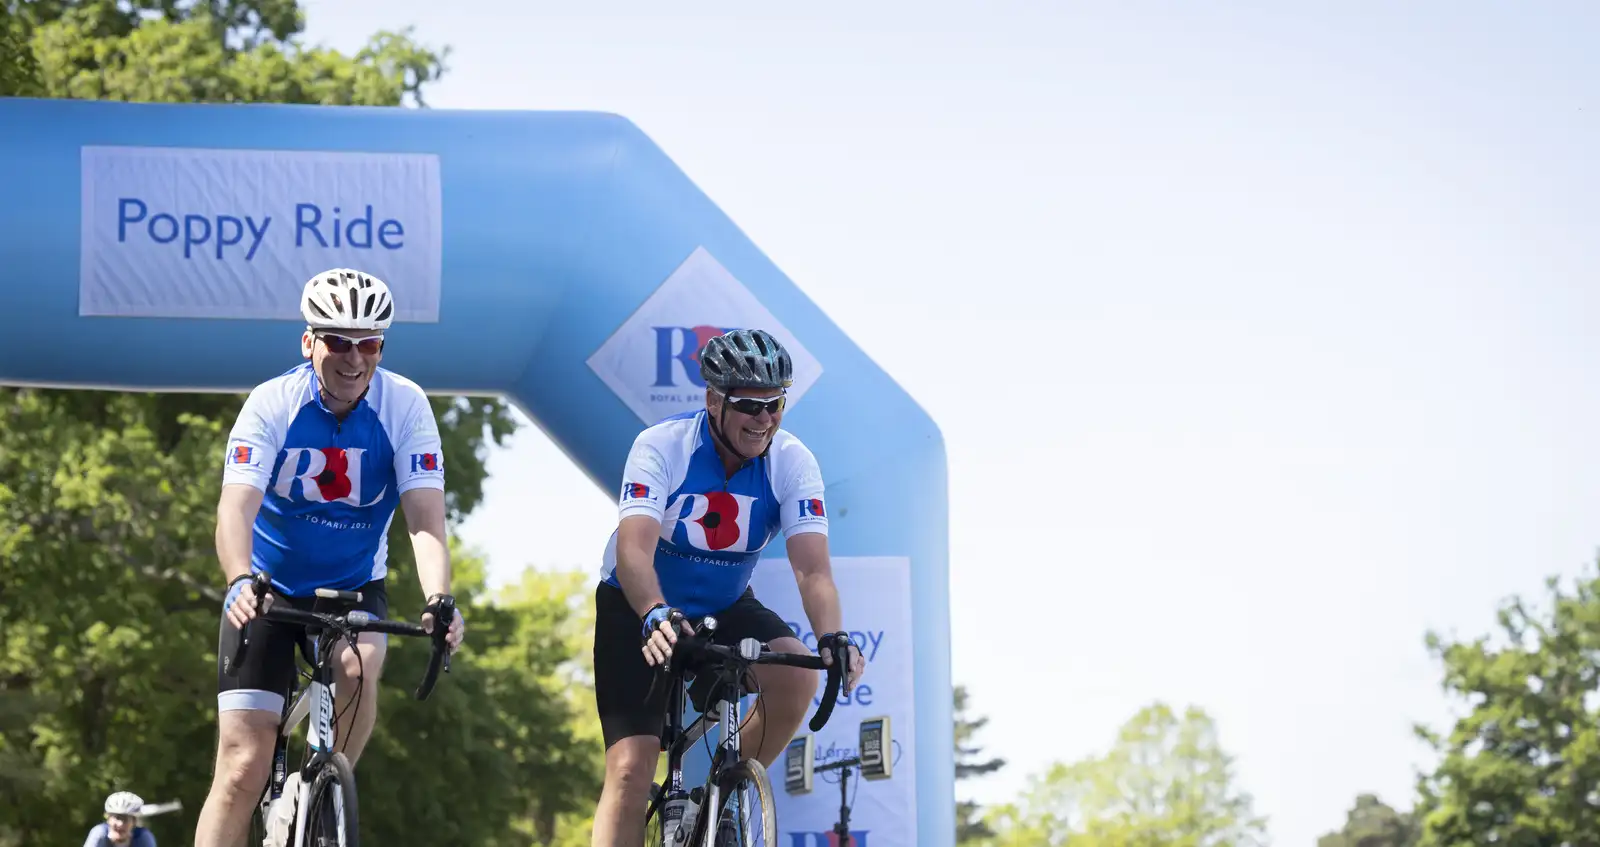 Two Cyclists at Poppy Ride - South Downs 2022